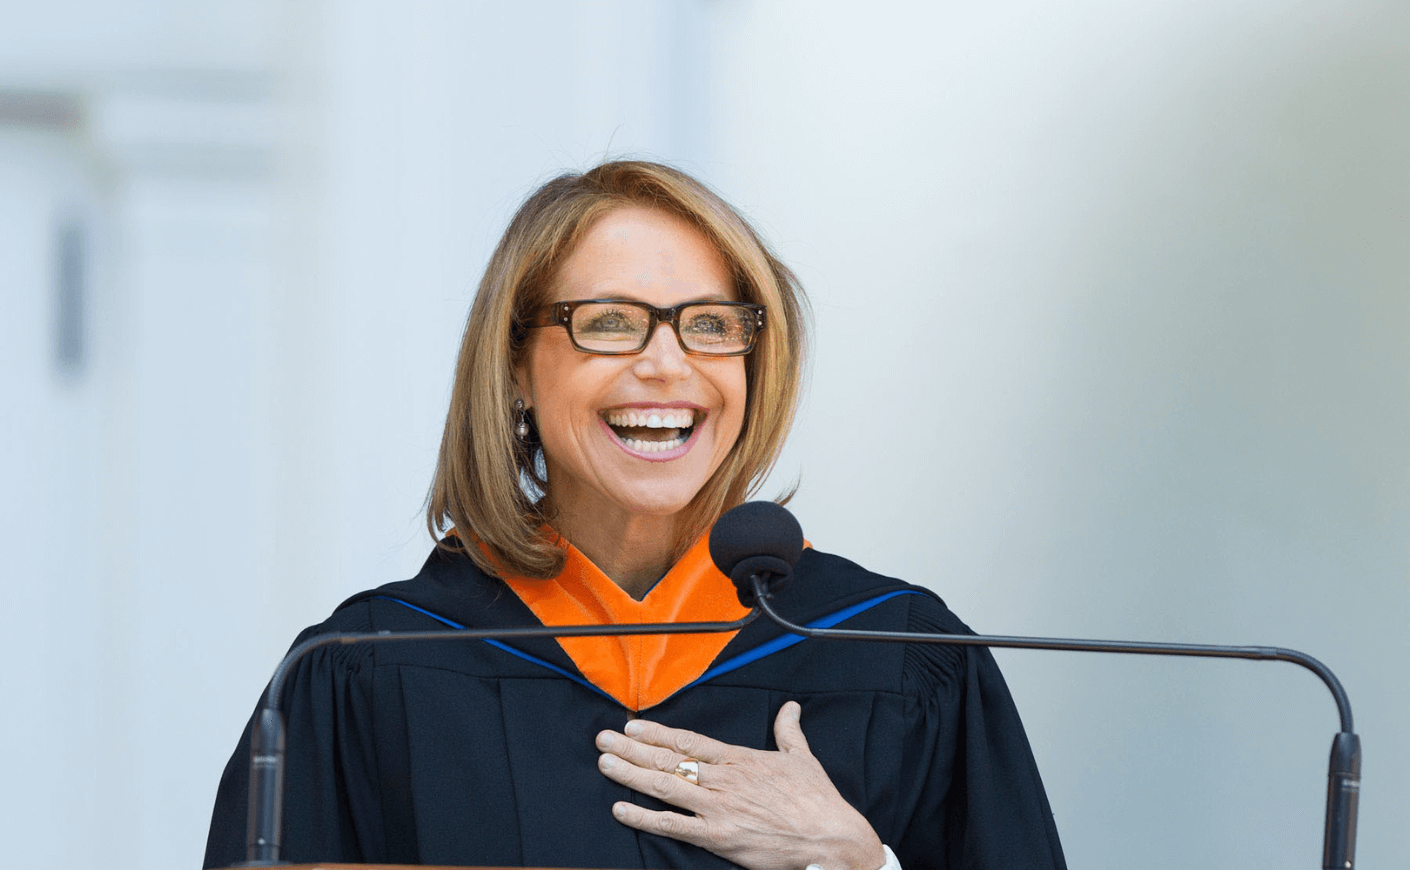 Katie Couric delivering a commencement speech at UVA